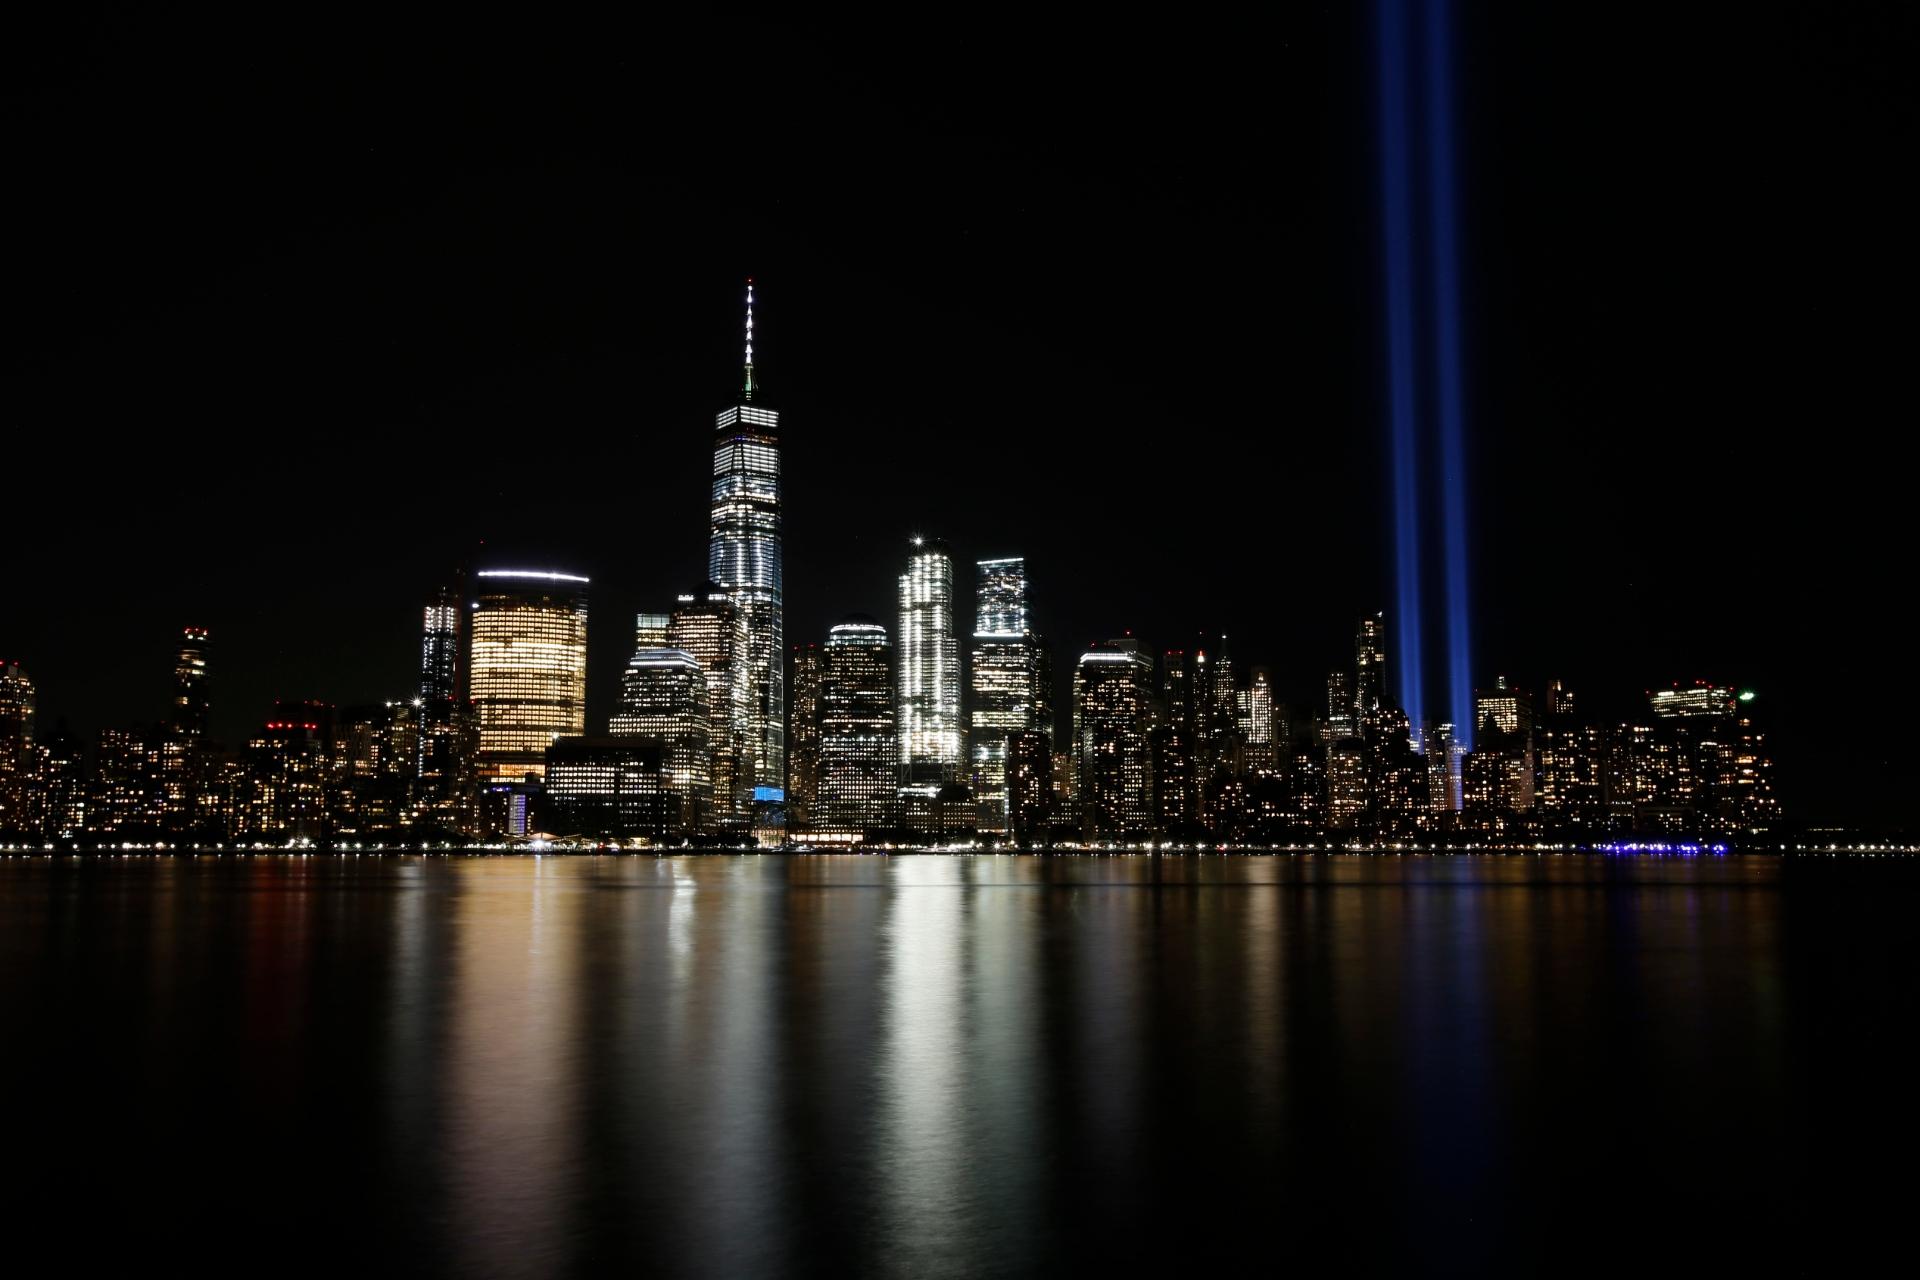 In this Sept. 11, 2017, file photo, the Tribute in Light illuminates in the sky above the Lower Manhattan area of New York, as seen from across the Hudson River in Jersey City, N.J. (AP Photo / Jason DeCrow, File)